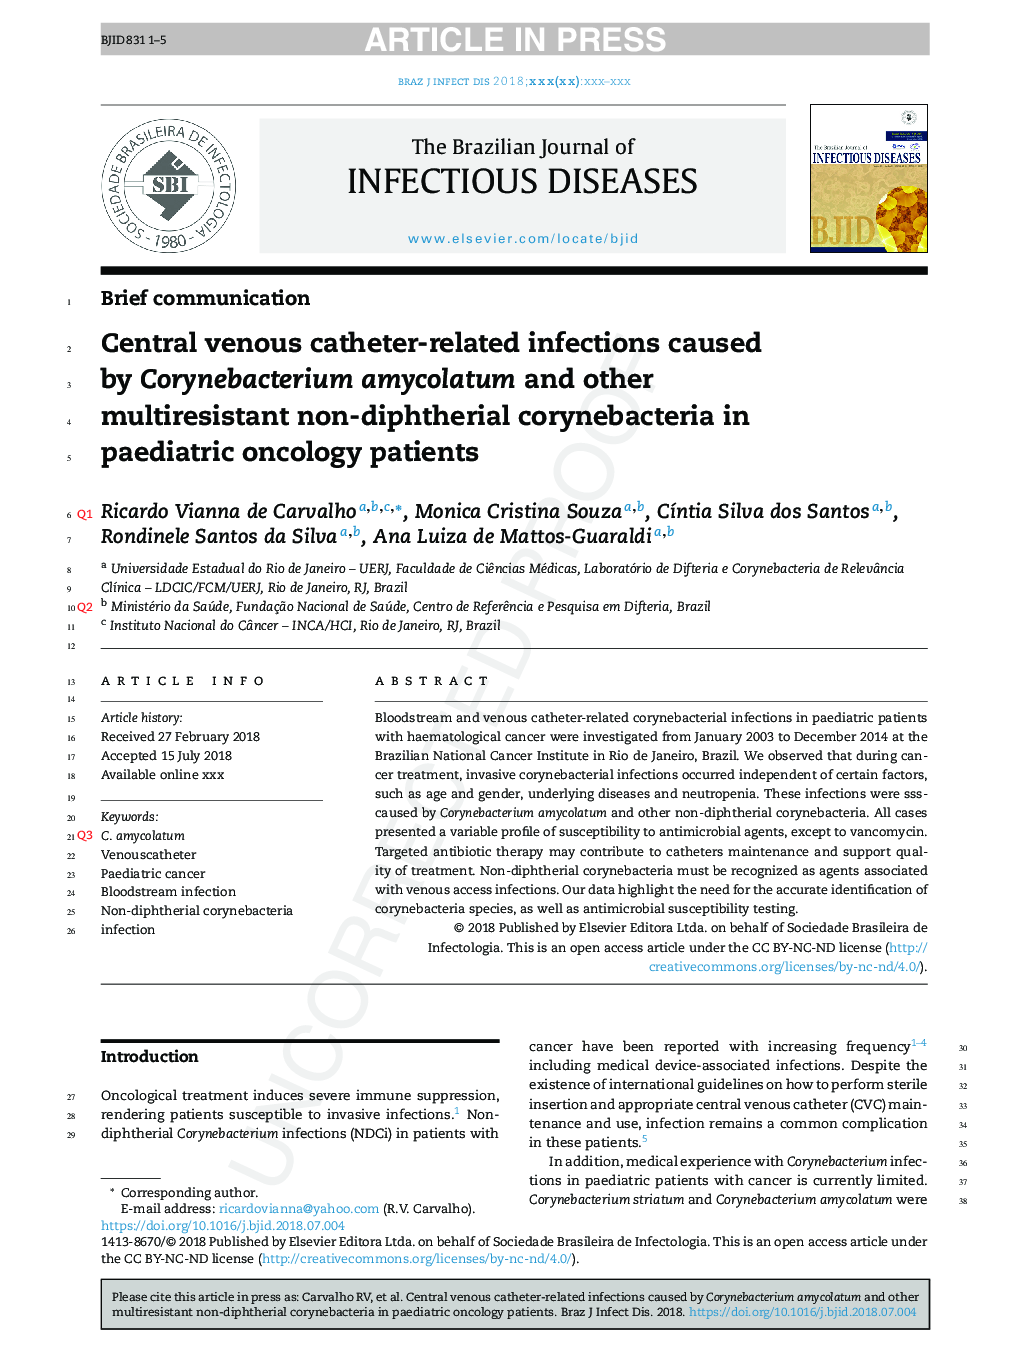 Central venous catheter-related infections caused by Corynebacterium amycolatum and other multiresistant non-diphtherial corynebacteria in paediatric oncology patients